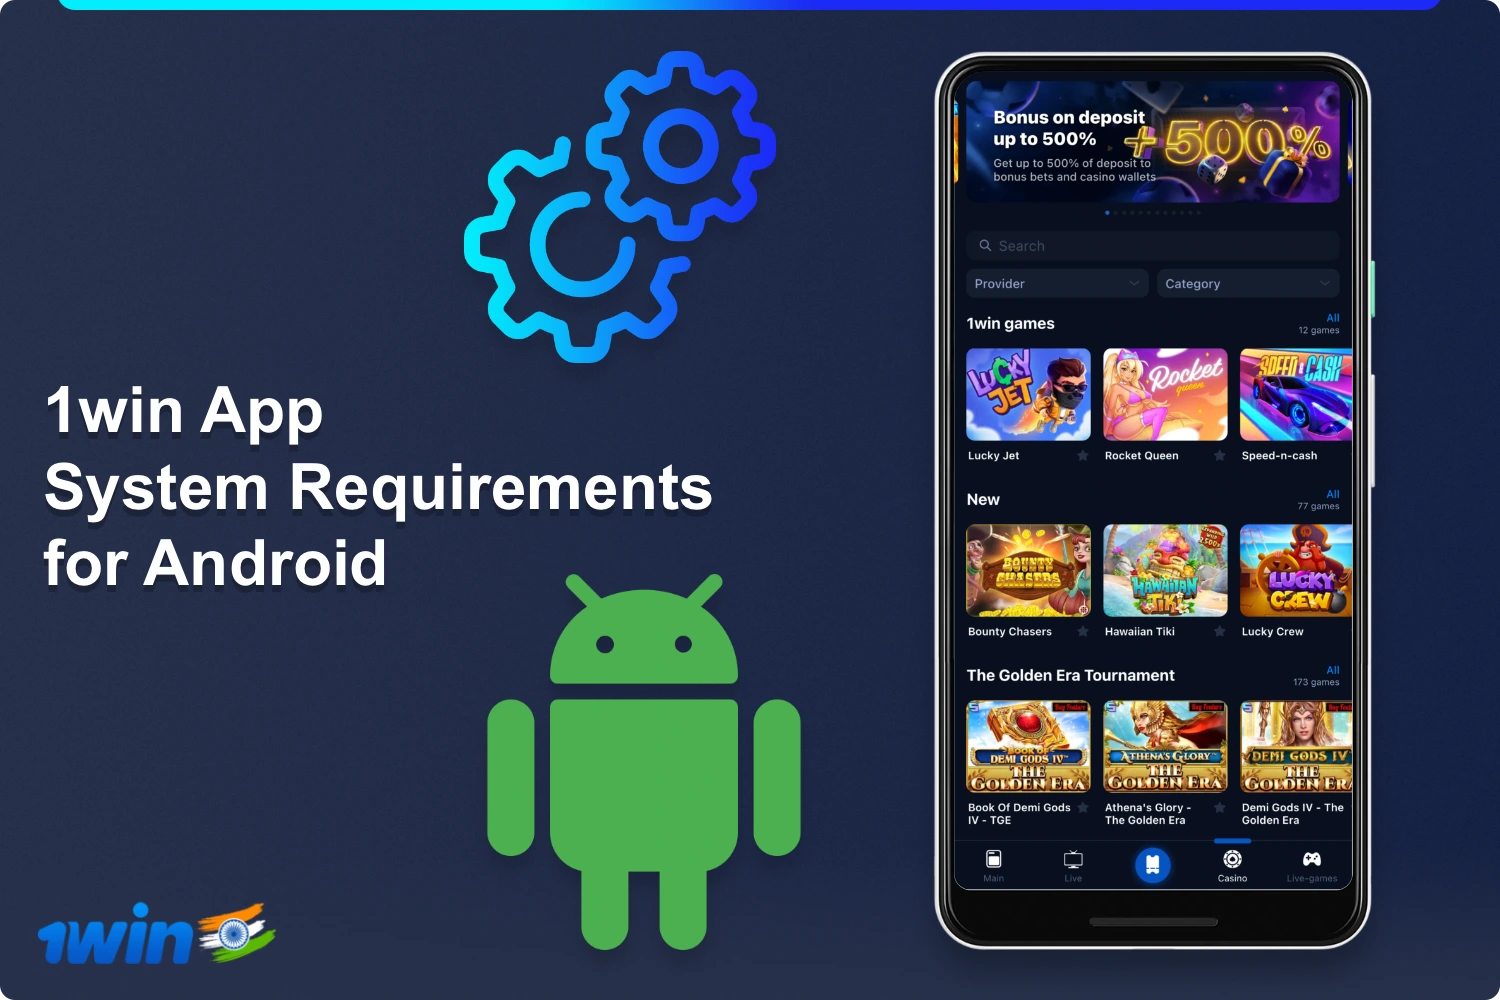 The system requirements of the application 1win for Android are so demanding that it can be installed on almost all Android devices